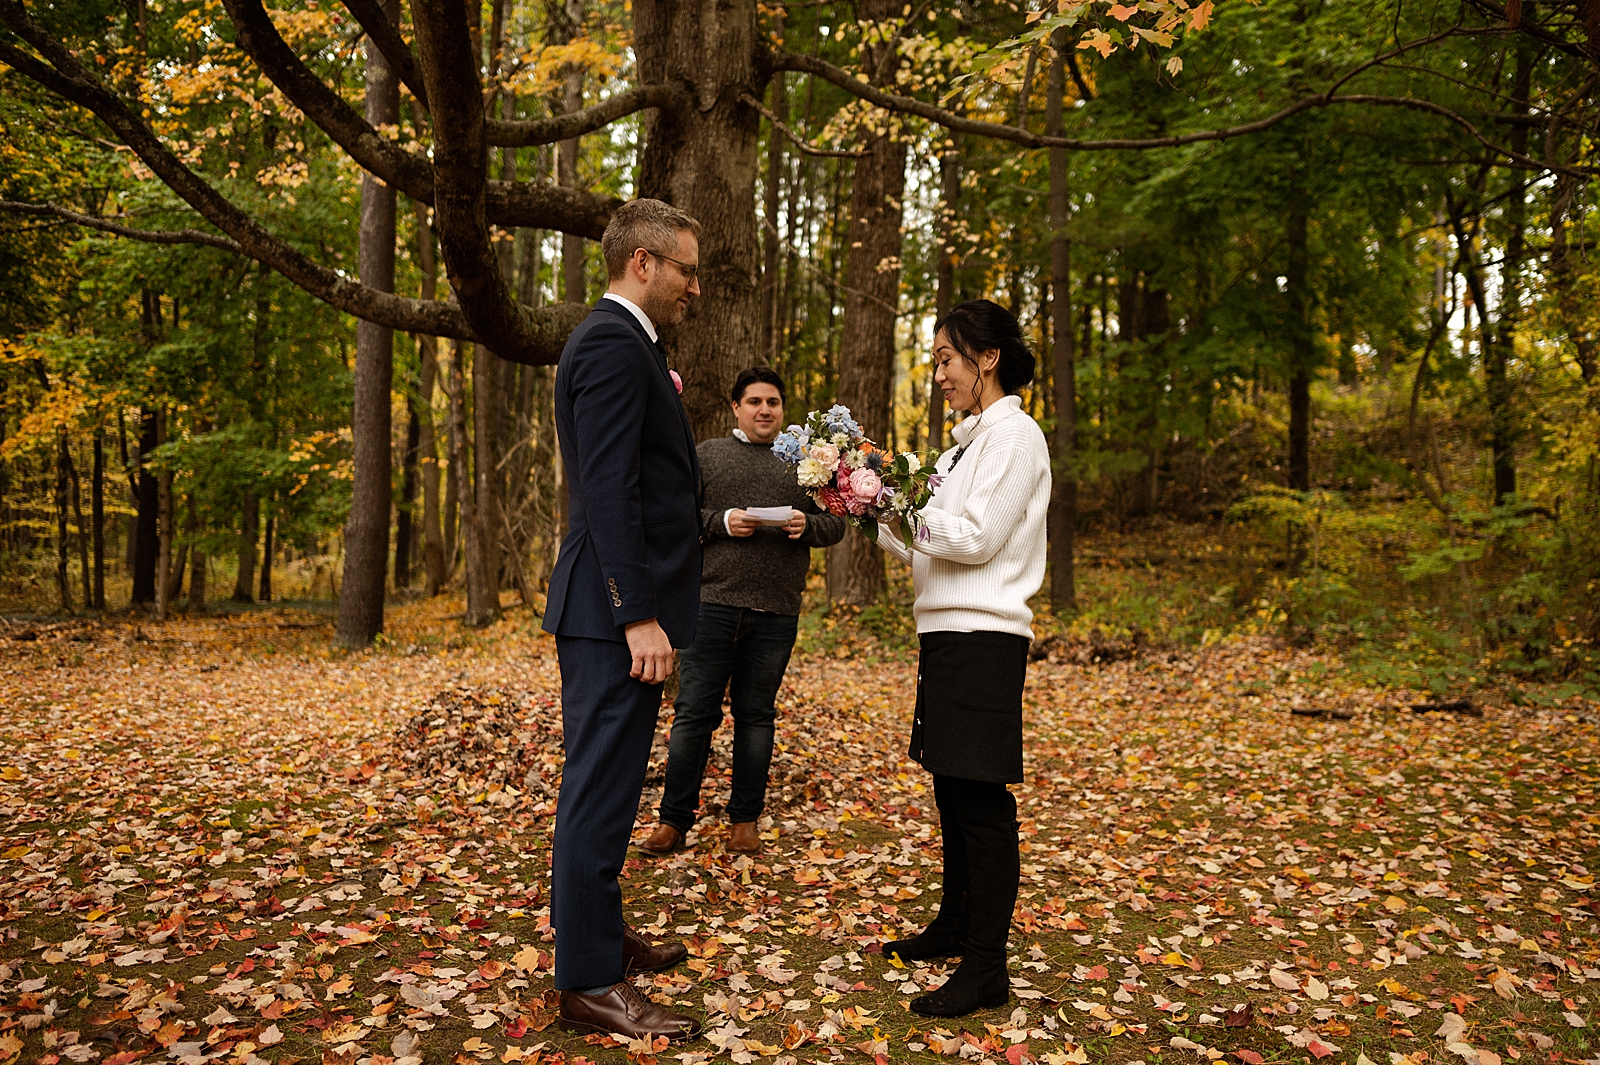 Bride reading vows to Groom with autumn leafs on the ground